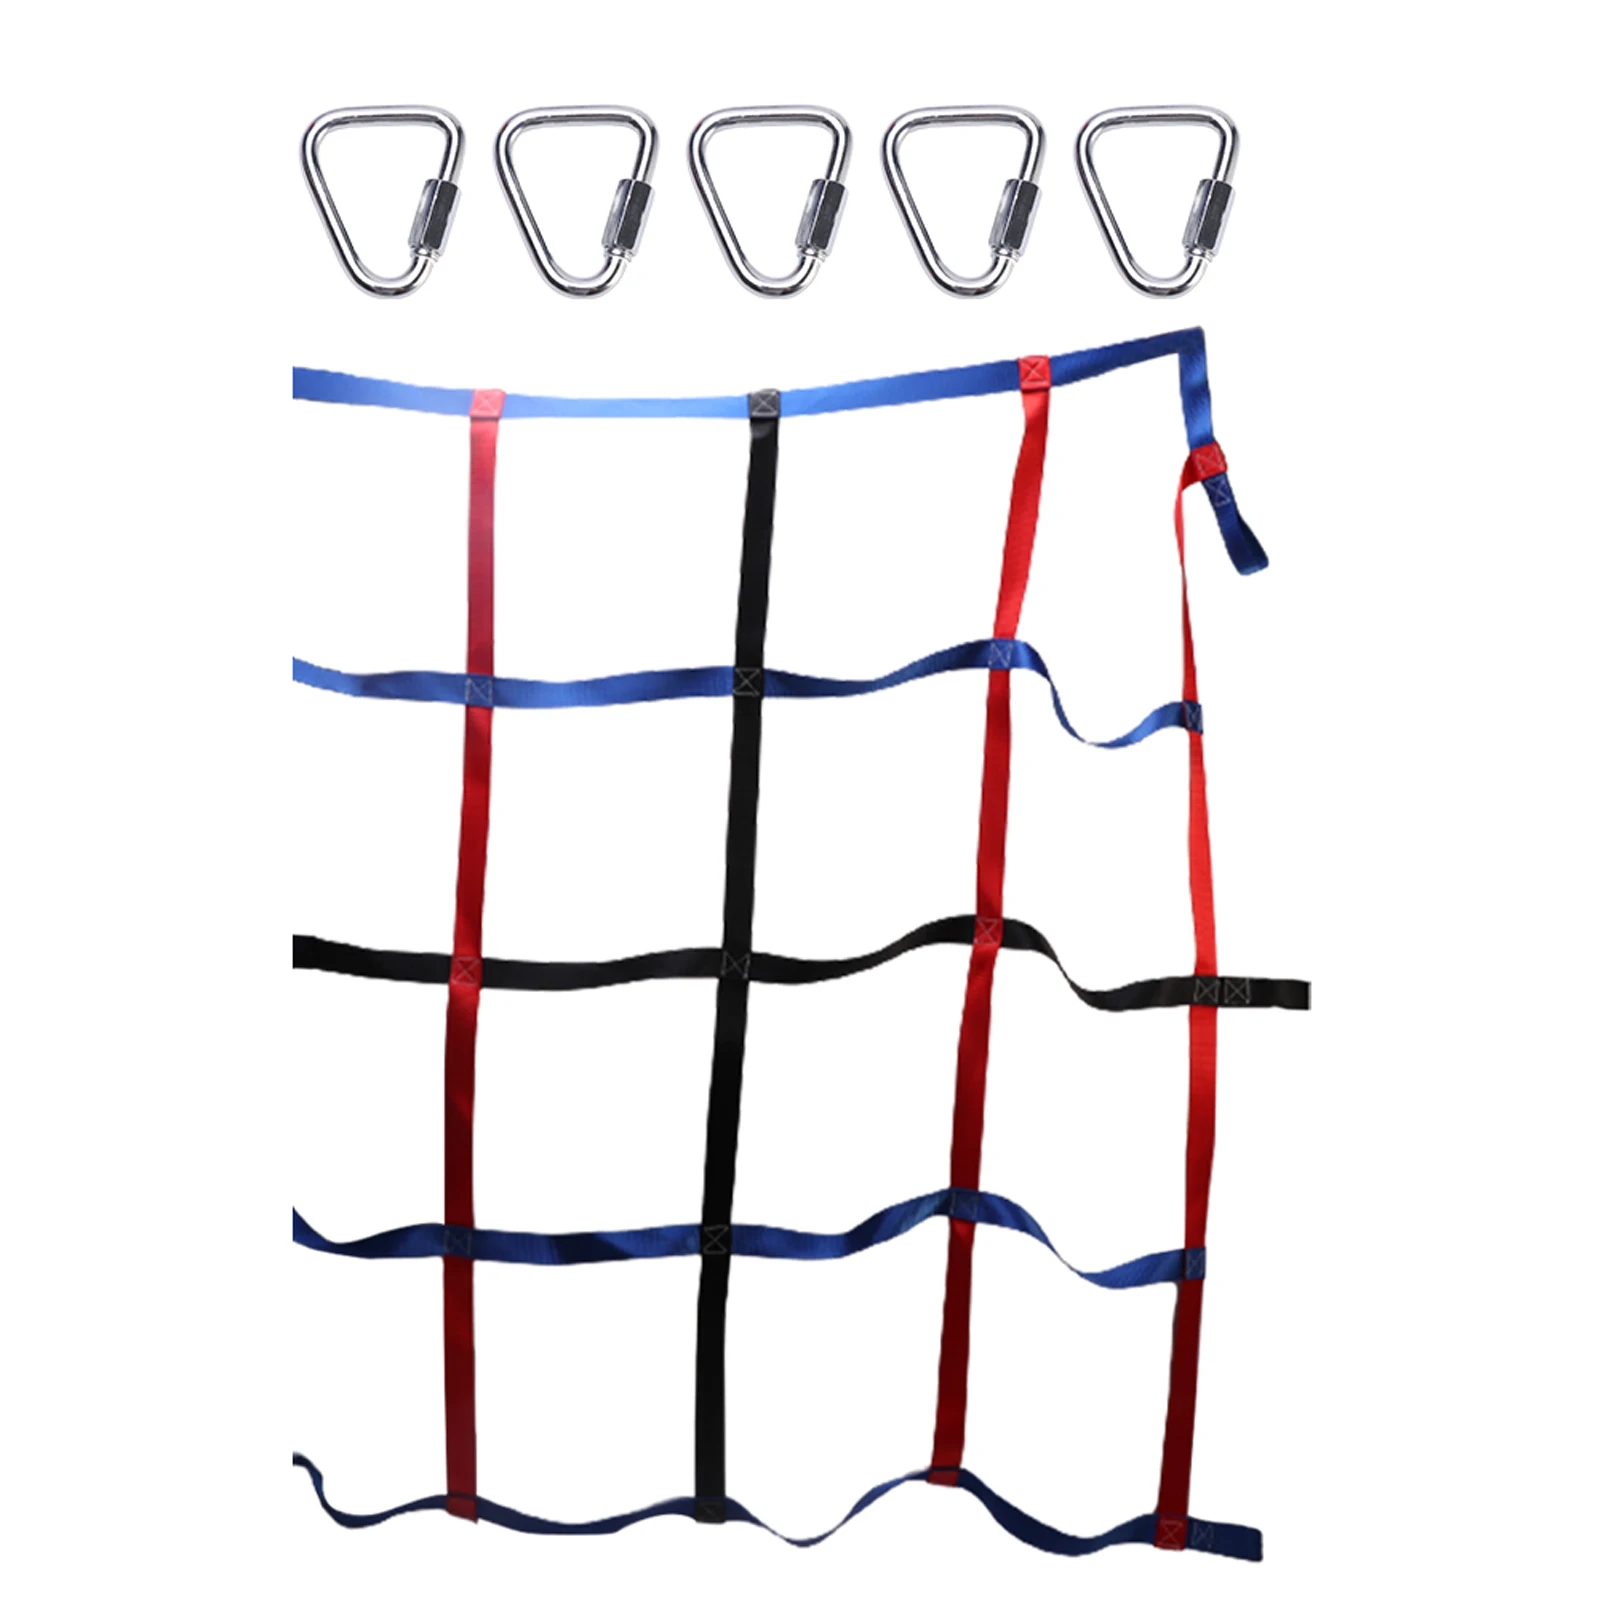 

For Kids Playground Attachment Backyard Obstacle Course Swing Rope Ladder Training Equipment Climbing Cargo Net Hanging Outdoor